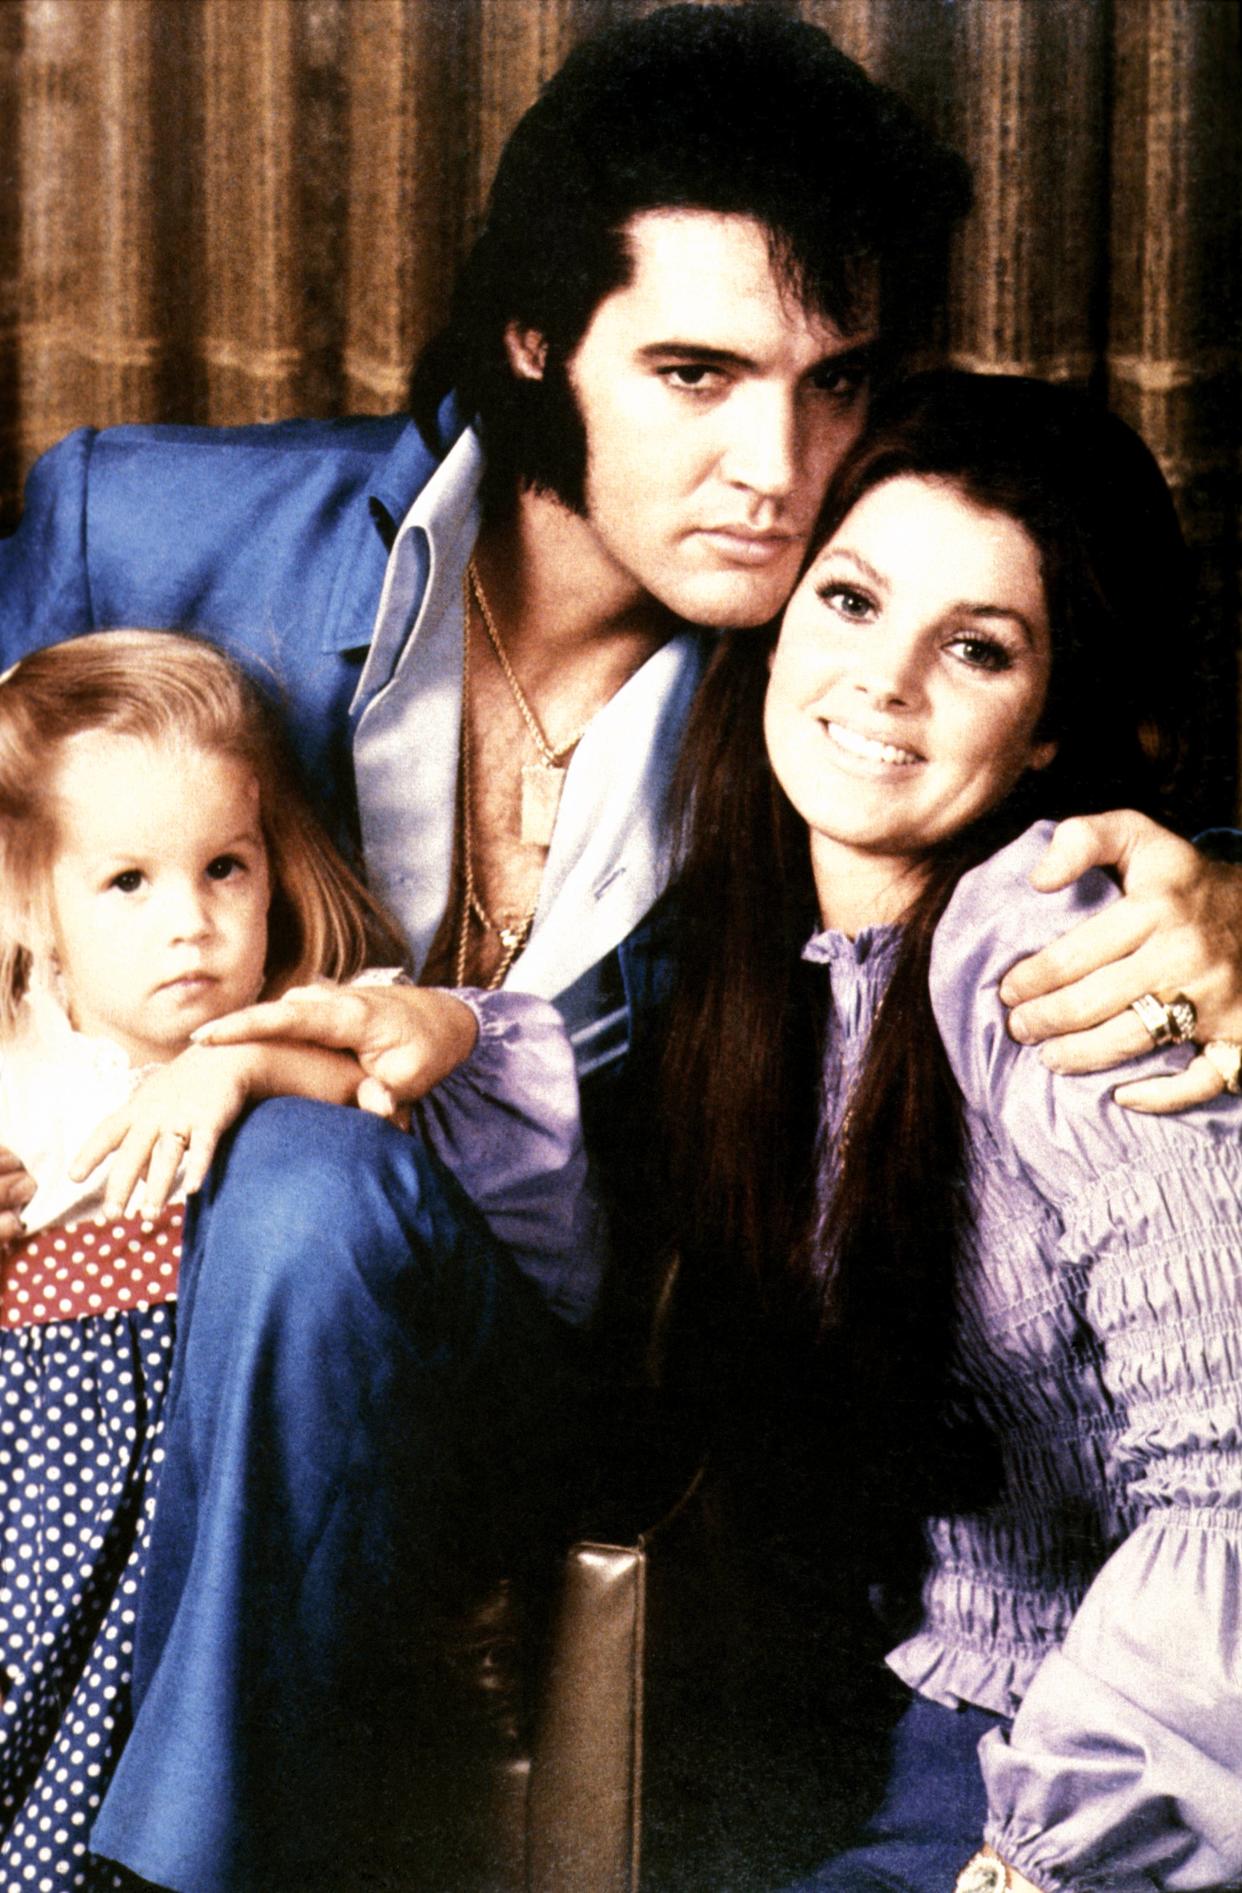 Lisa-Marie Presley with her parents, Elvis and  Priscilla Preslet, in 1970. (Photo: GAB Archive/Redferns)